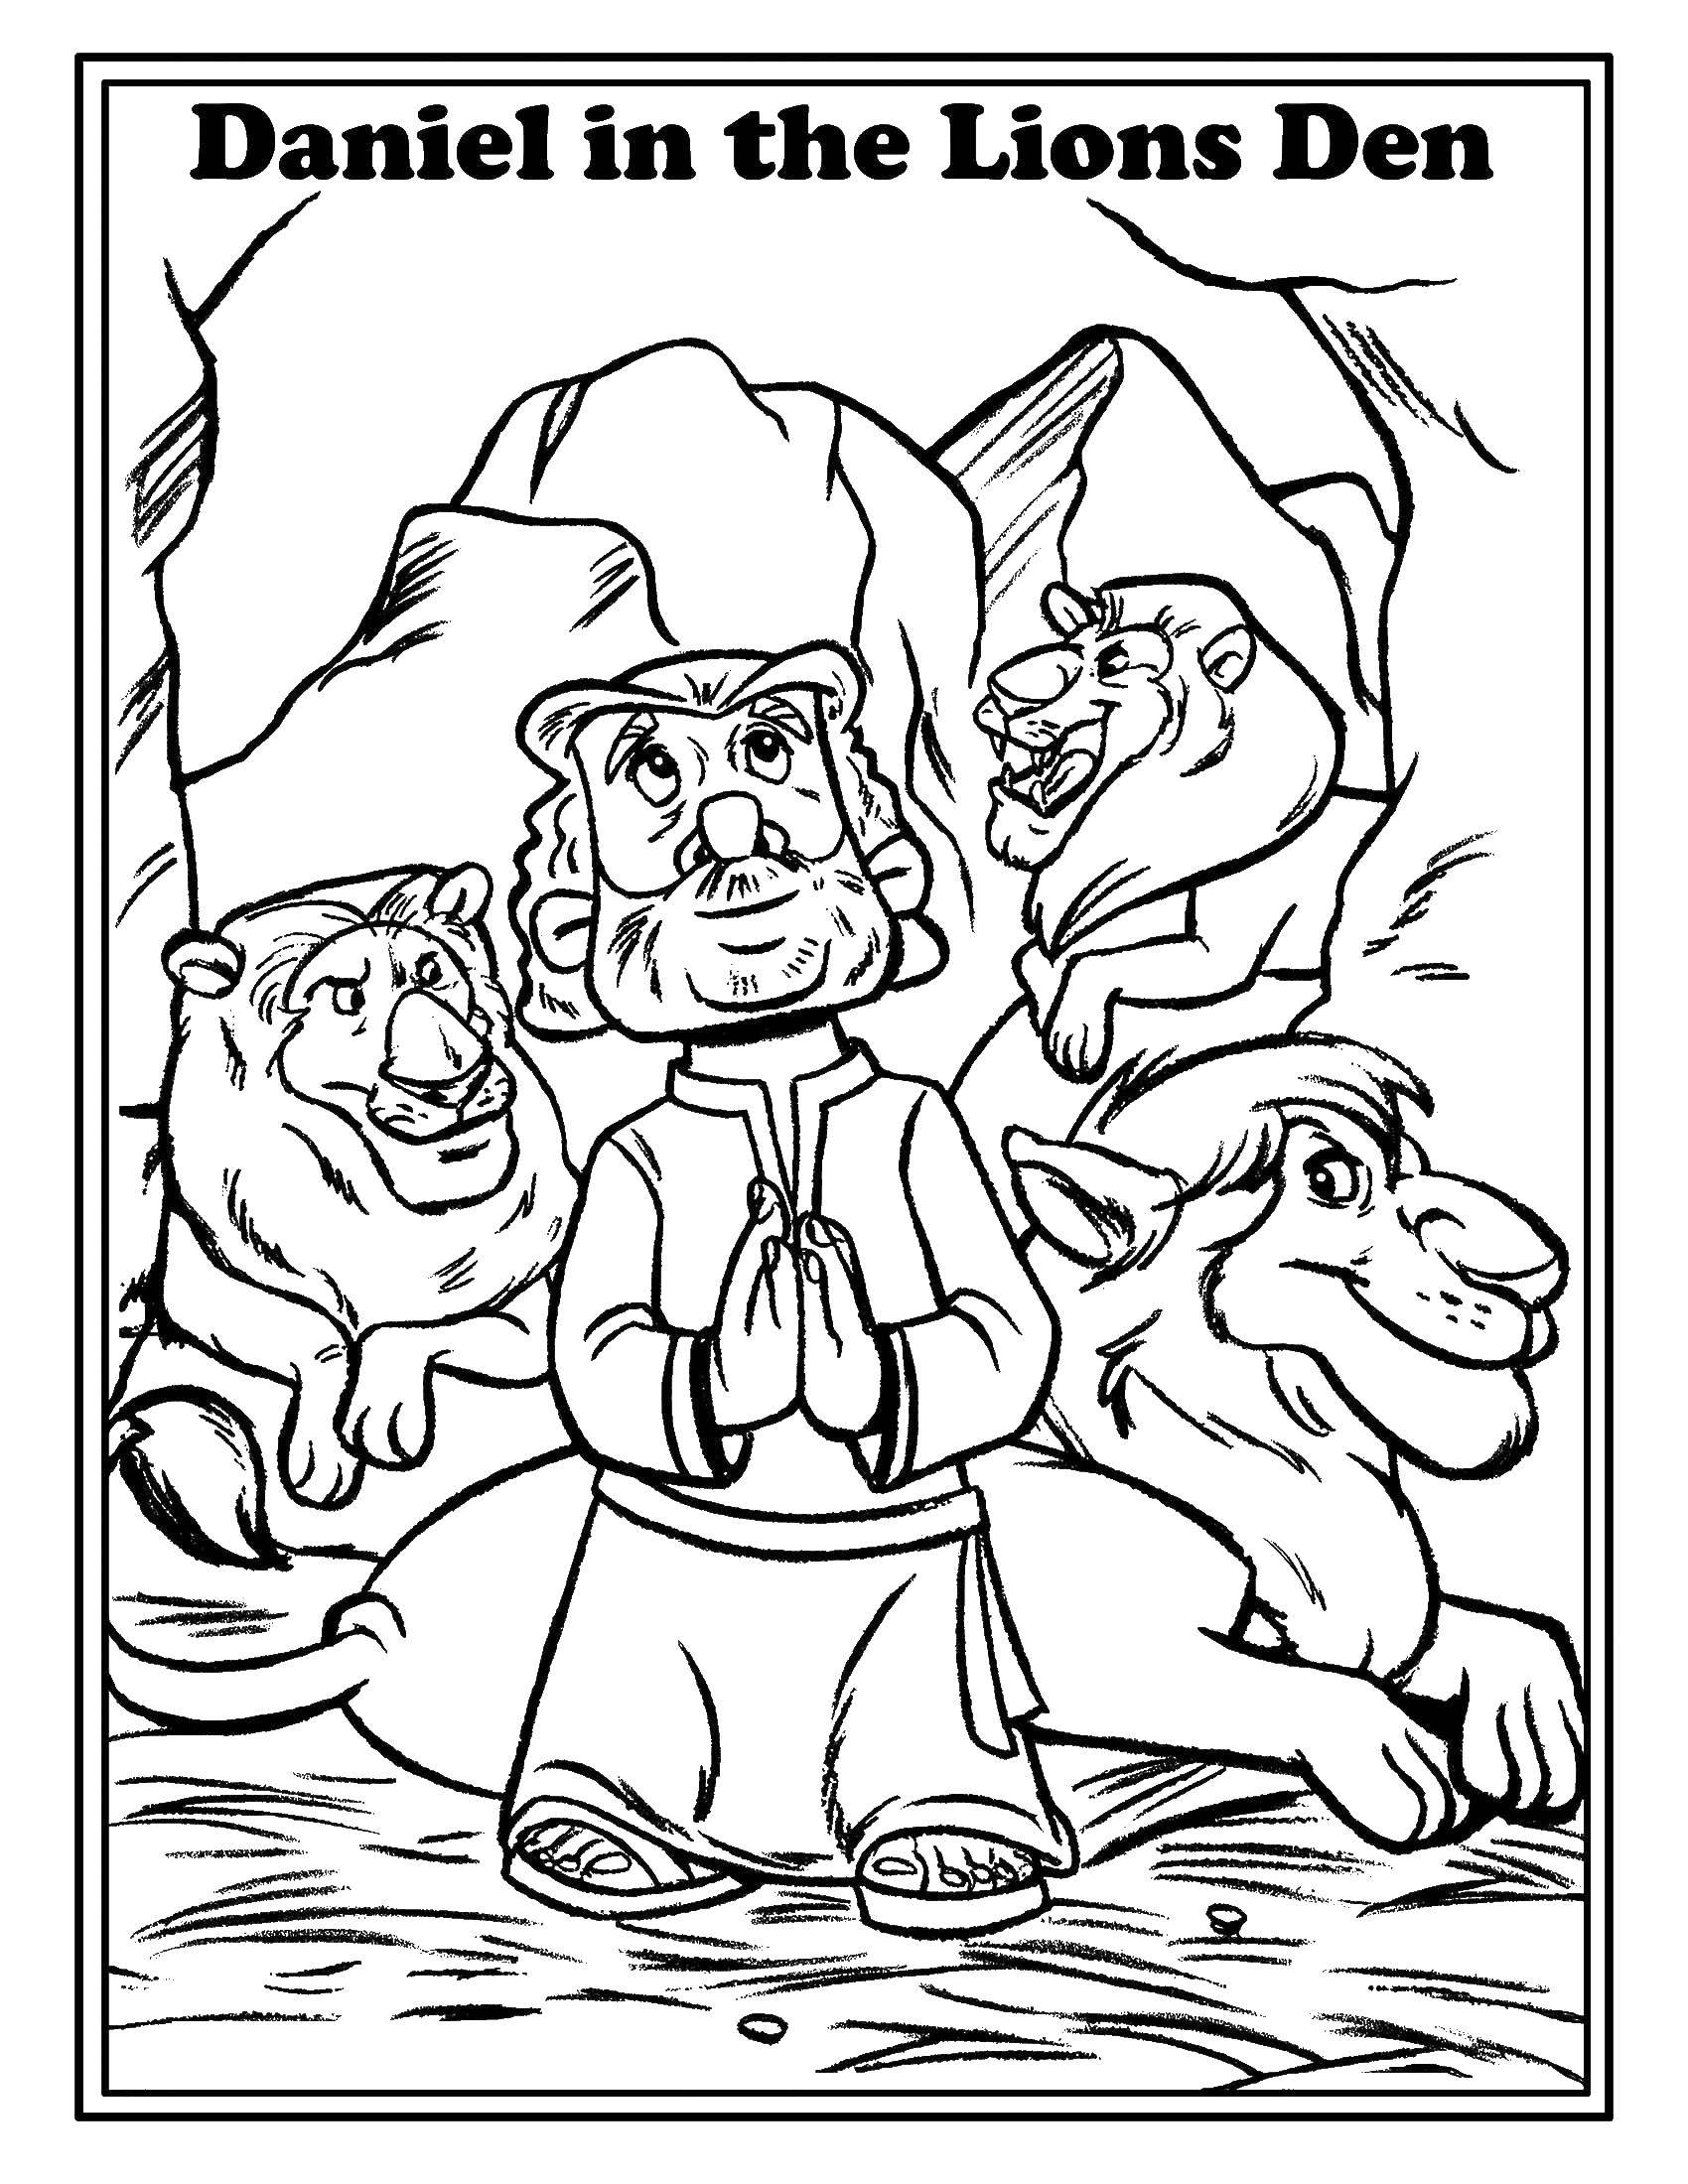 Coloring Lions do not eat human. Category the Bible. Tags:  the Bible, Jesus.